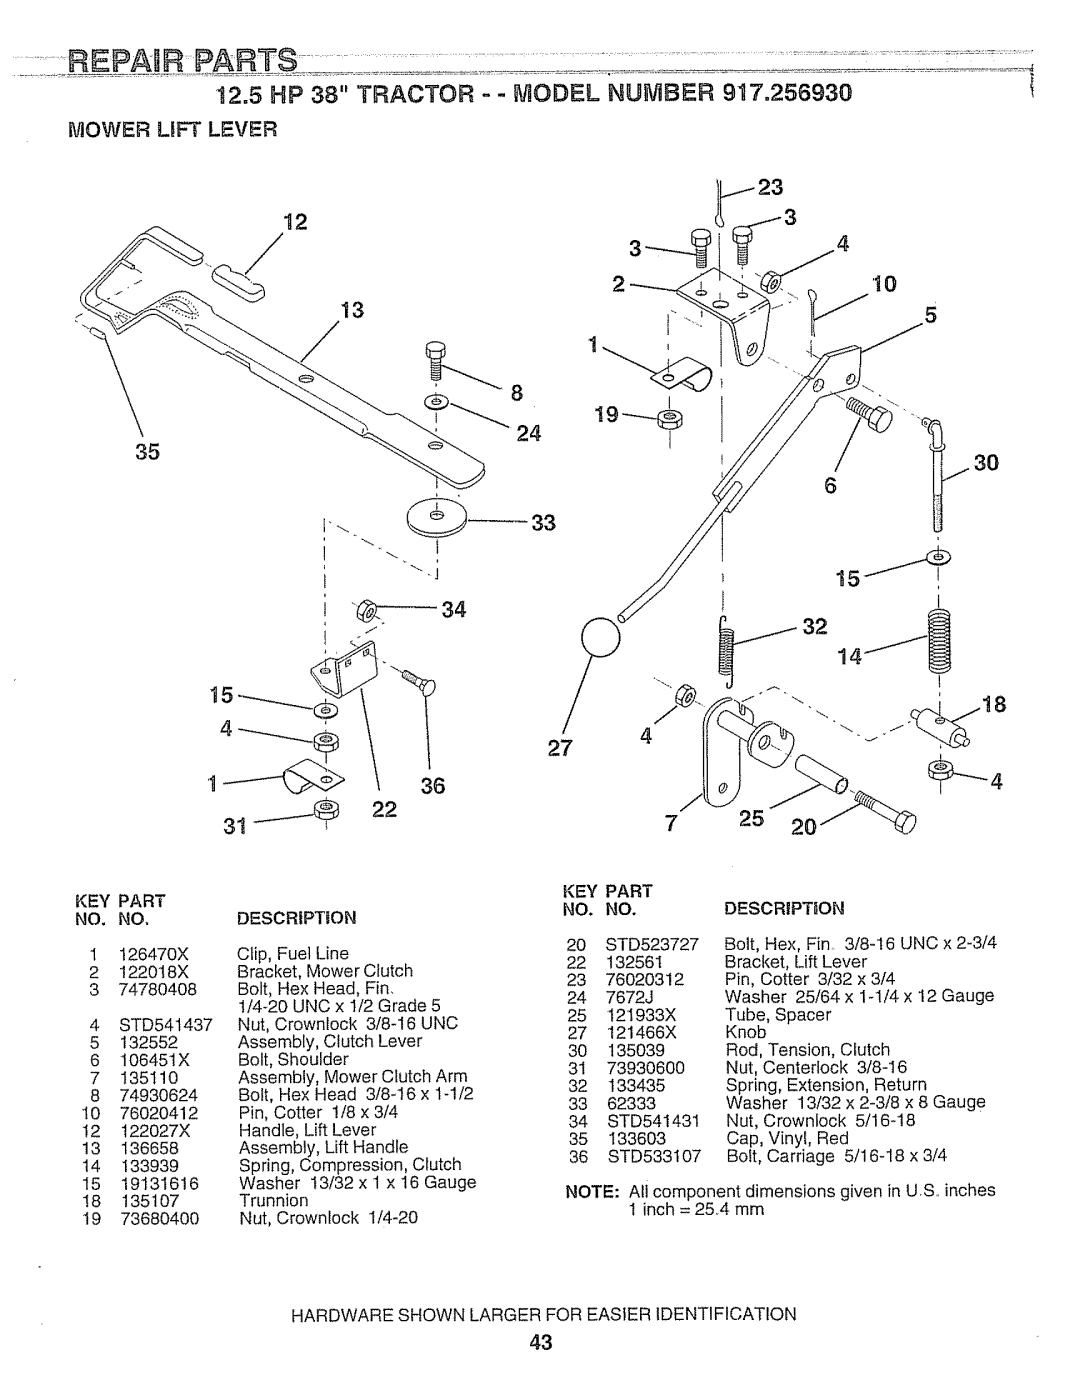 Craftsman 917.25693 owner manual Parts, 31 ---_, ============, 12.5 HP 38 TRACTOR - - MODEL NUMBER, Mower Lift Lever 